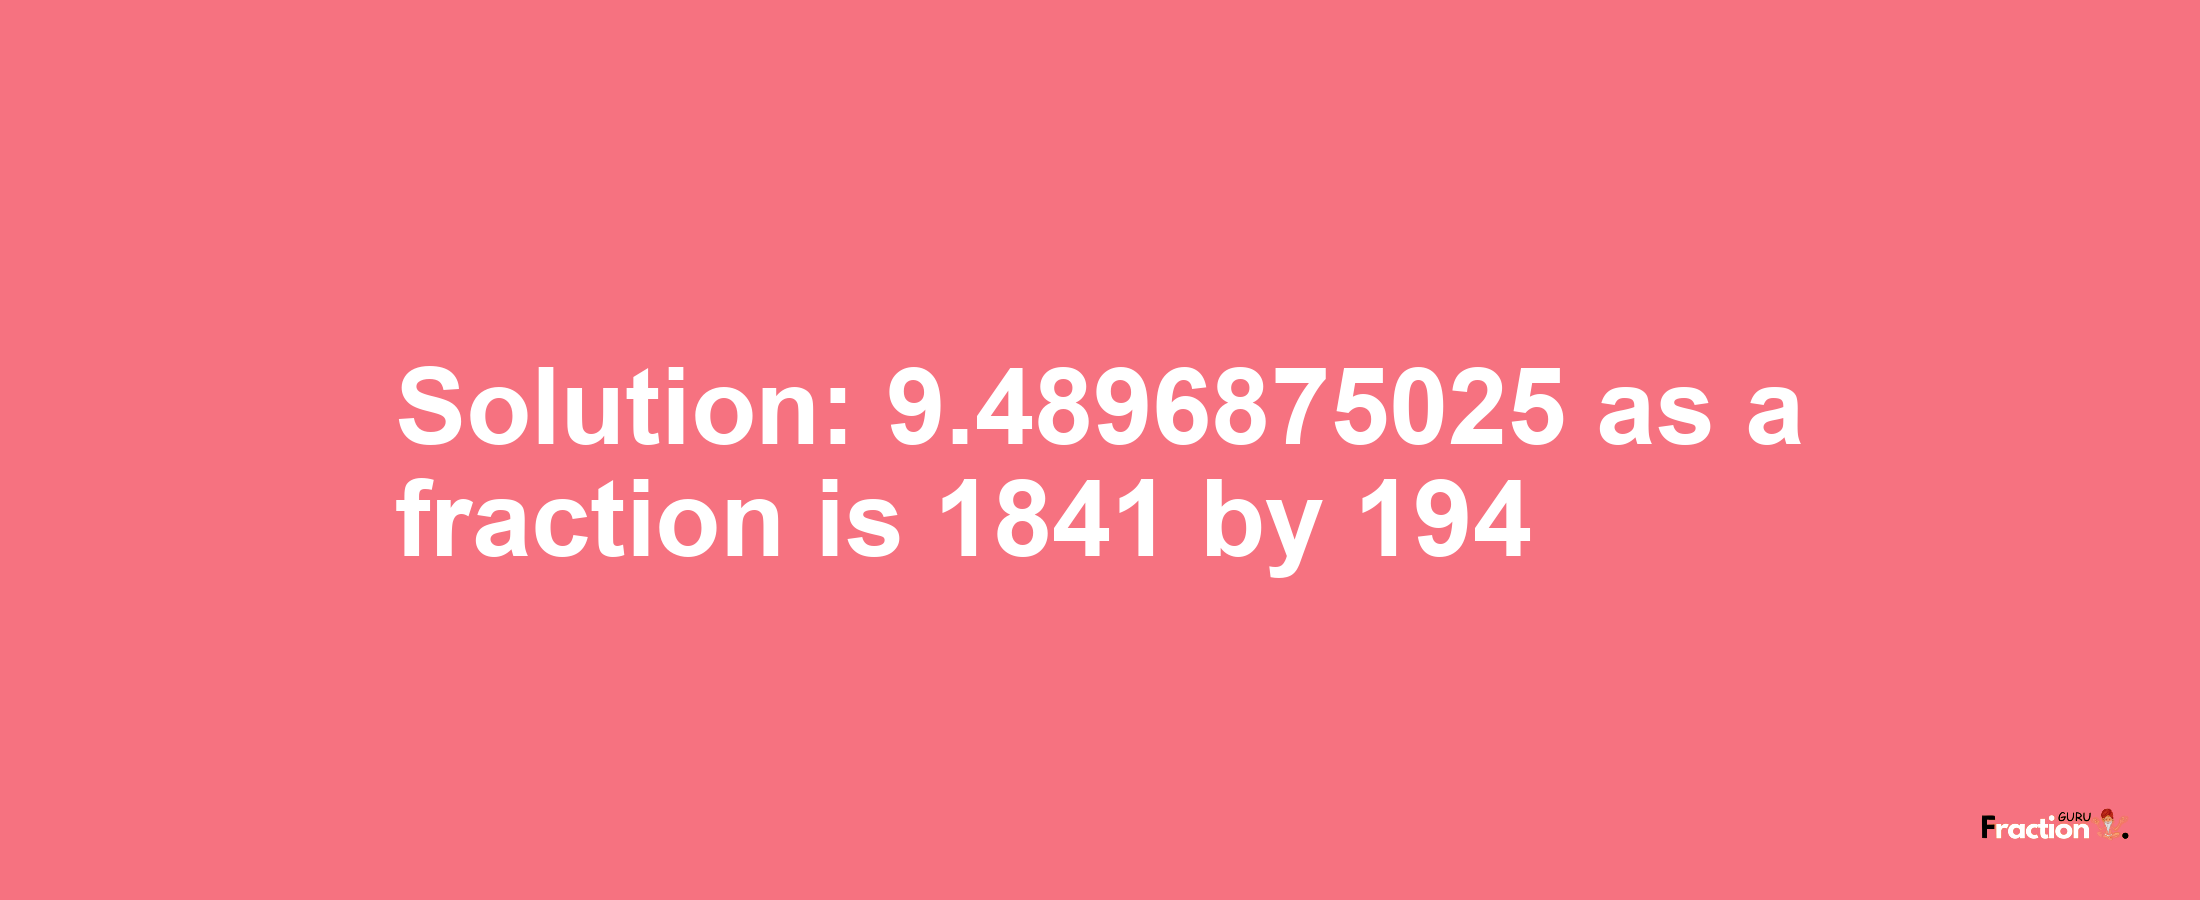 Solution:9.4896875025 as a fraction is 1841/194